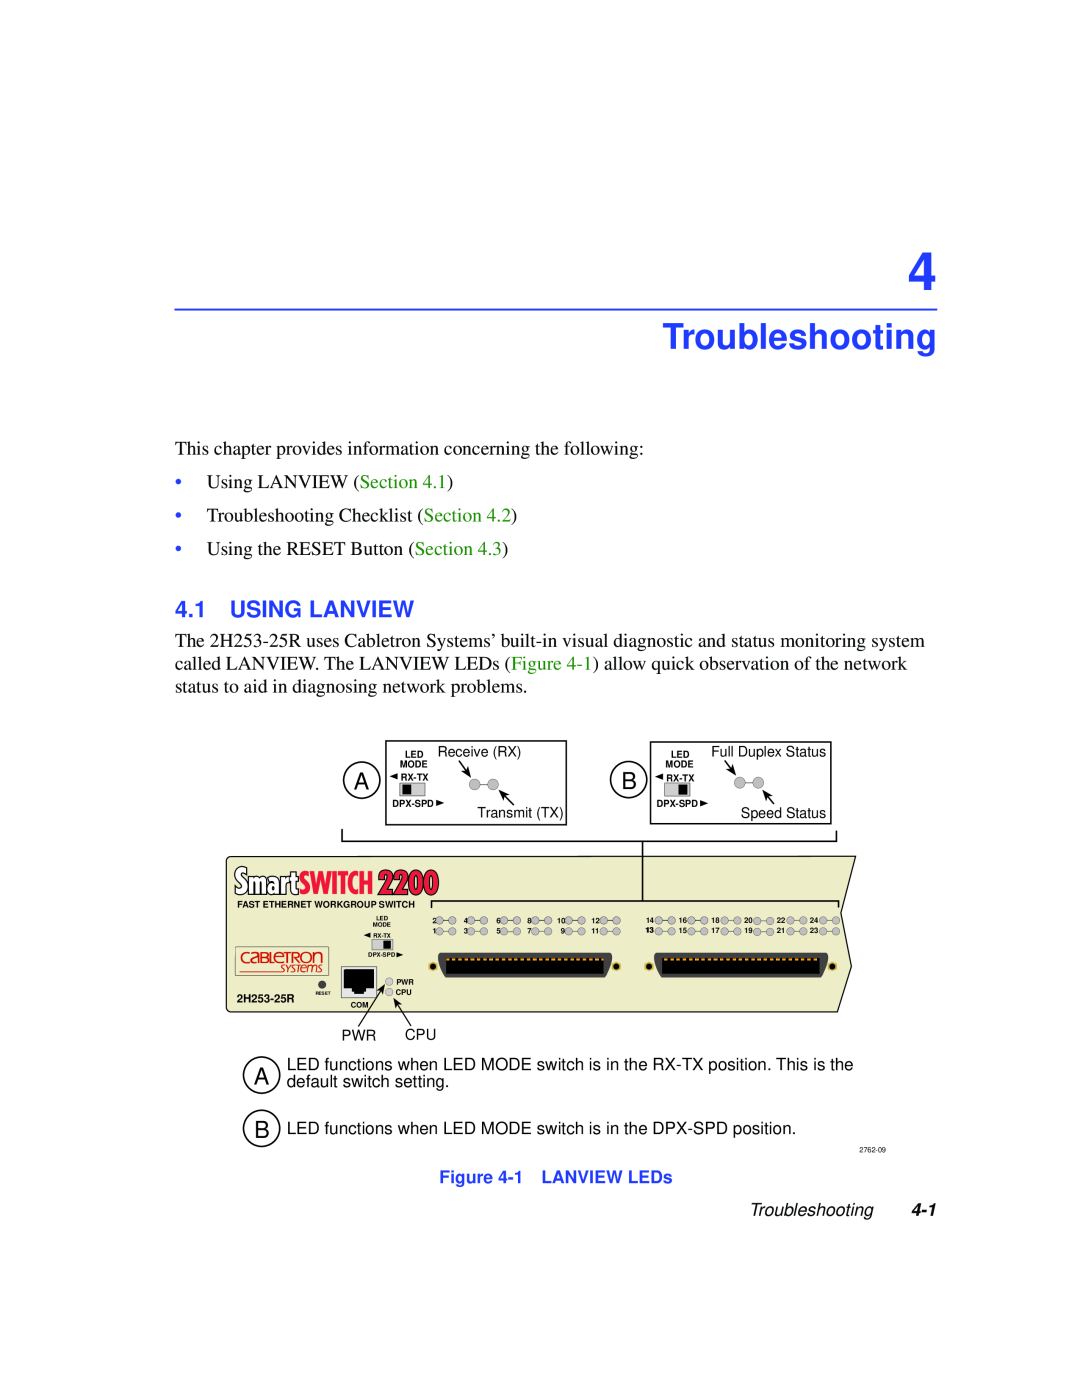 Cabletron Systems 2H253-25R manual Troubleshooting, Using Lanview 